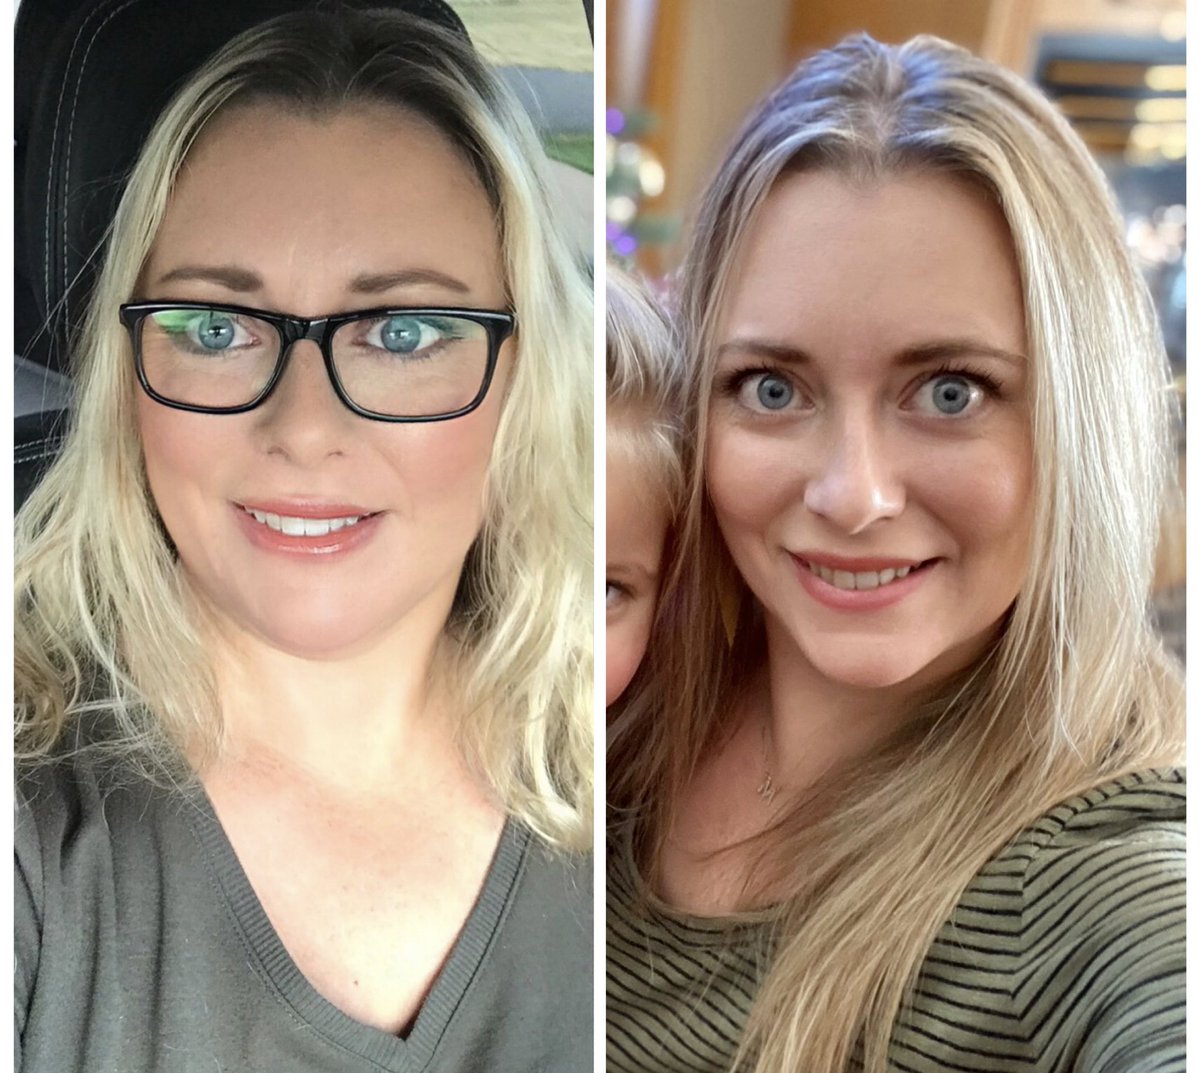 #facetofacefriday Oct 8, 2021 vs Dec 25, 2022 My face was so puffy, it was hard to get a decent photo while trying to hide my double chin! Attempting to delete some photos & videos in my phone, reminded each time of how far I’ve come & how much better I feel! #carnivorediet